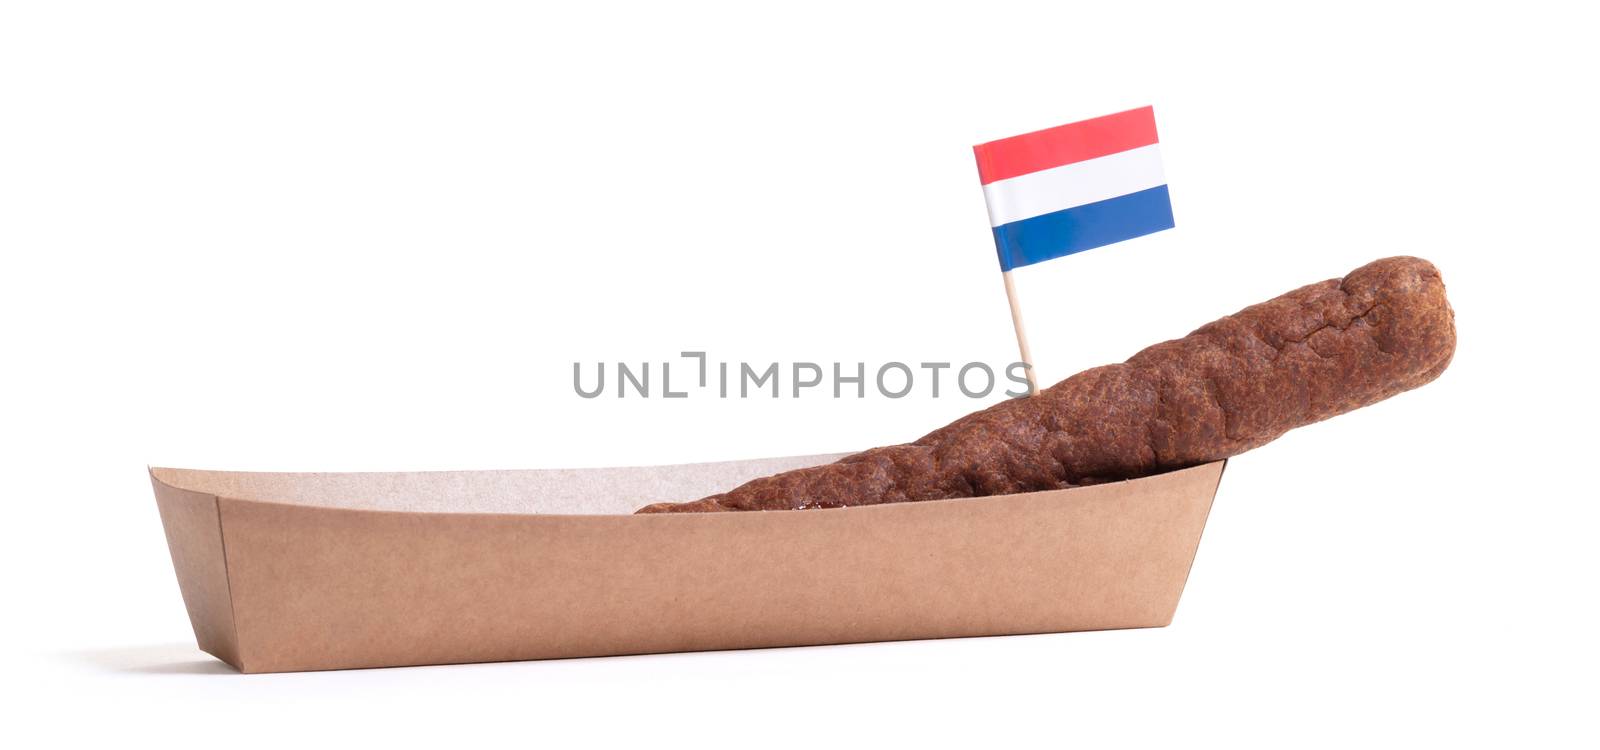 One frikadel, a Dutch fast food snack on a paper tray